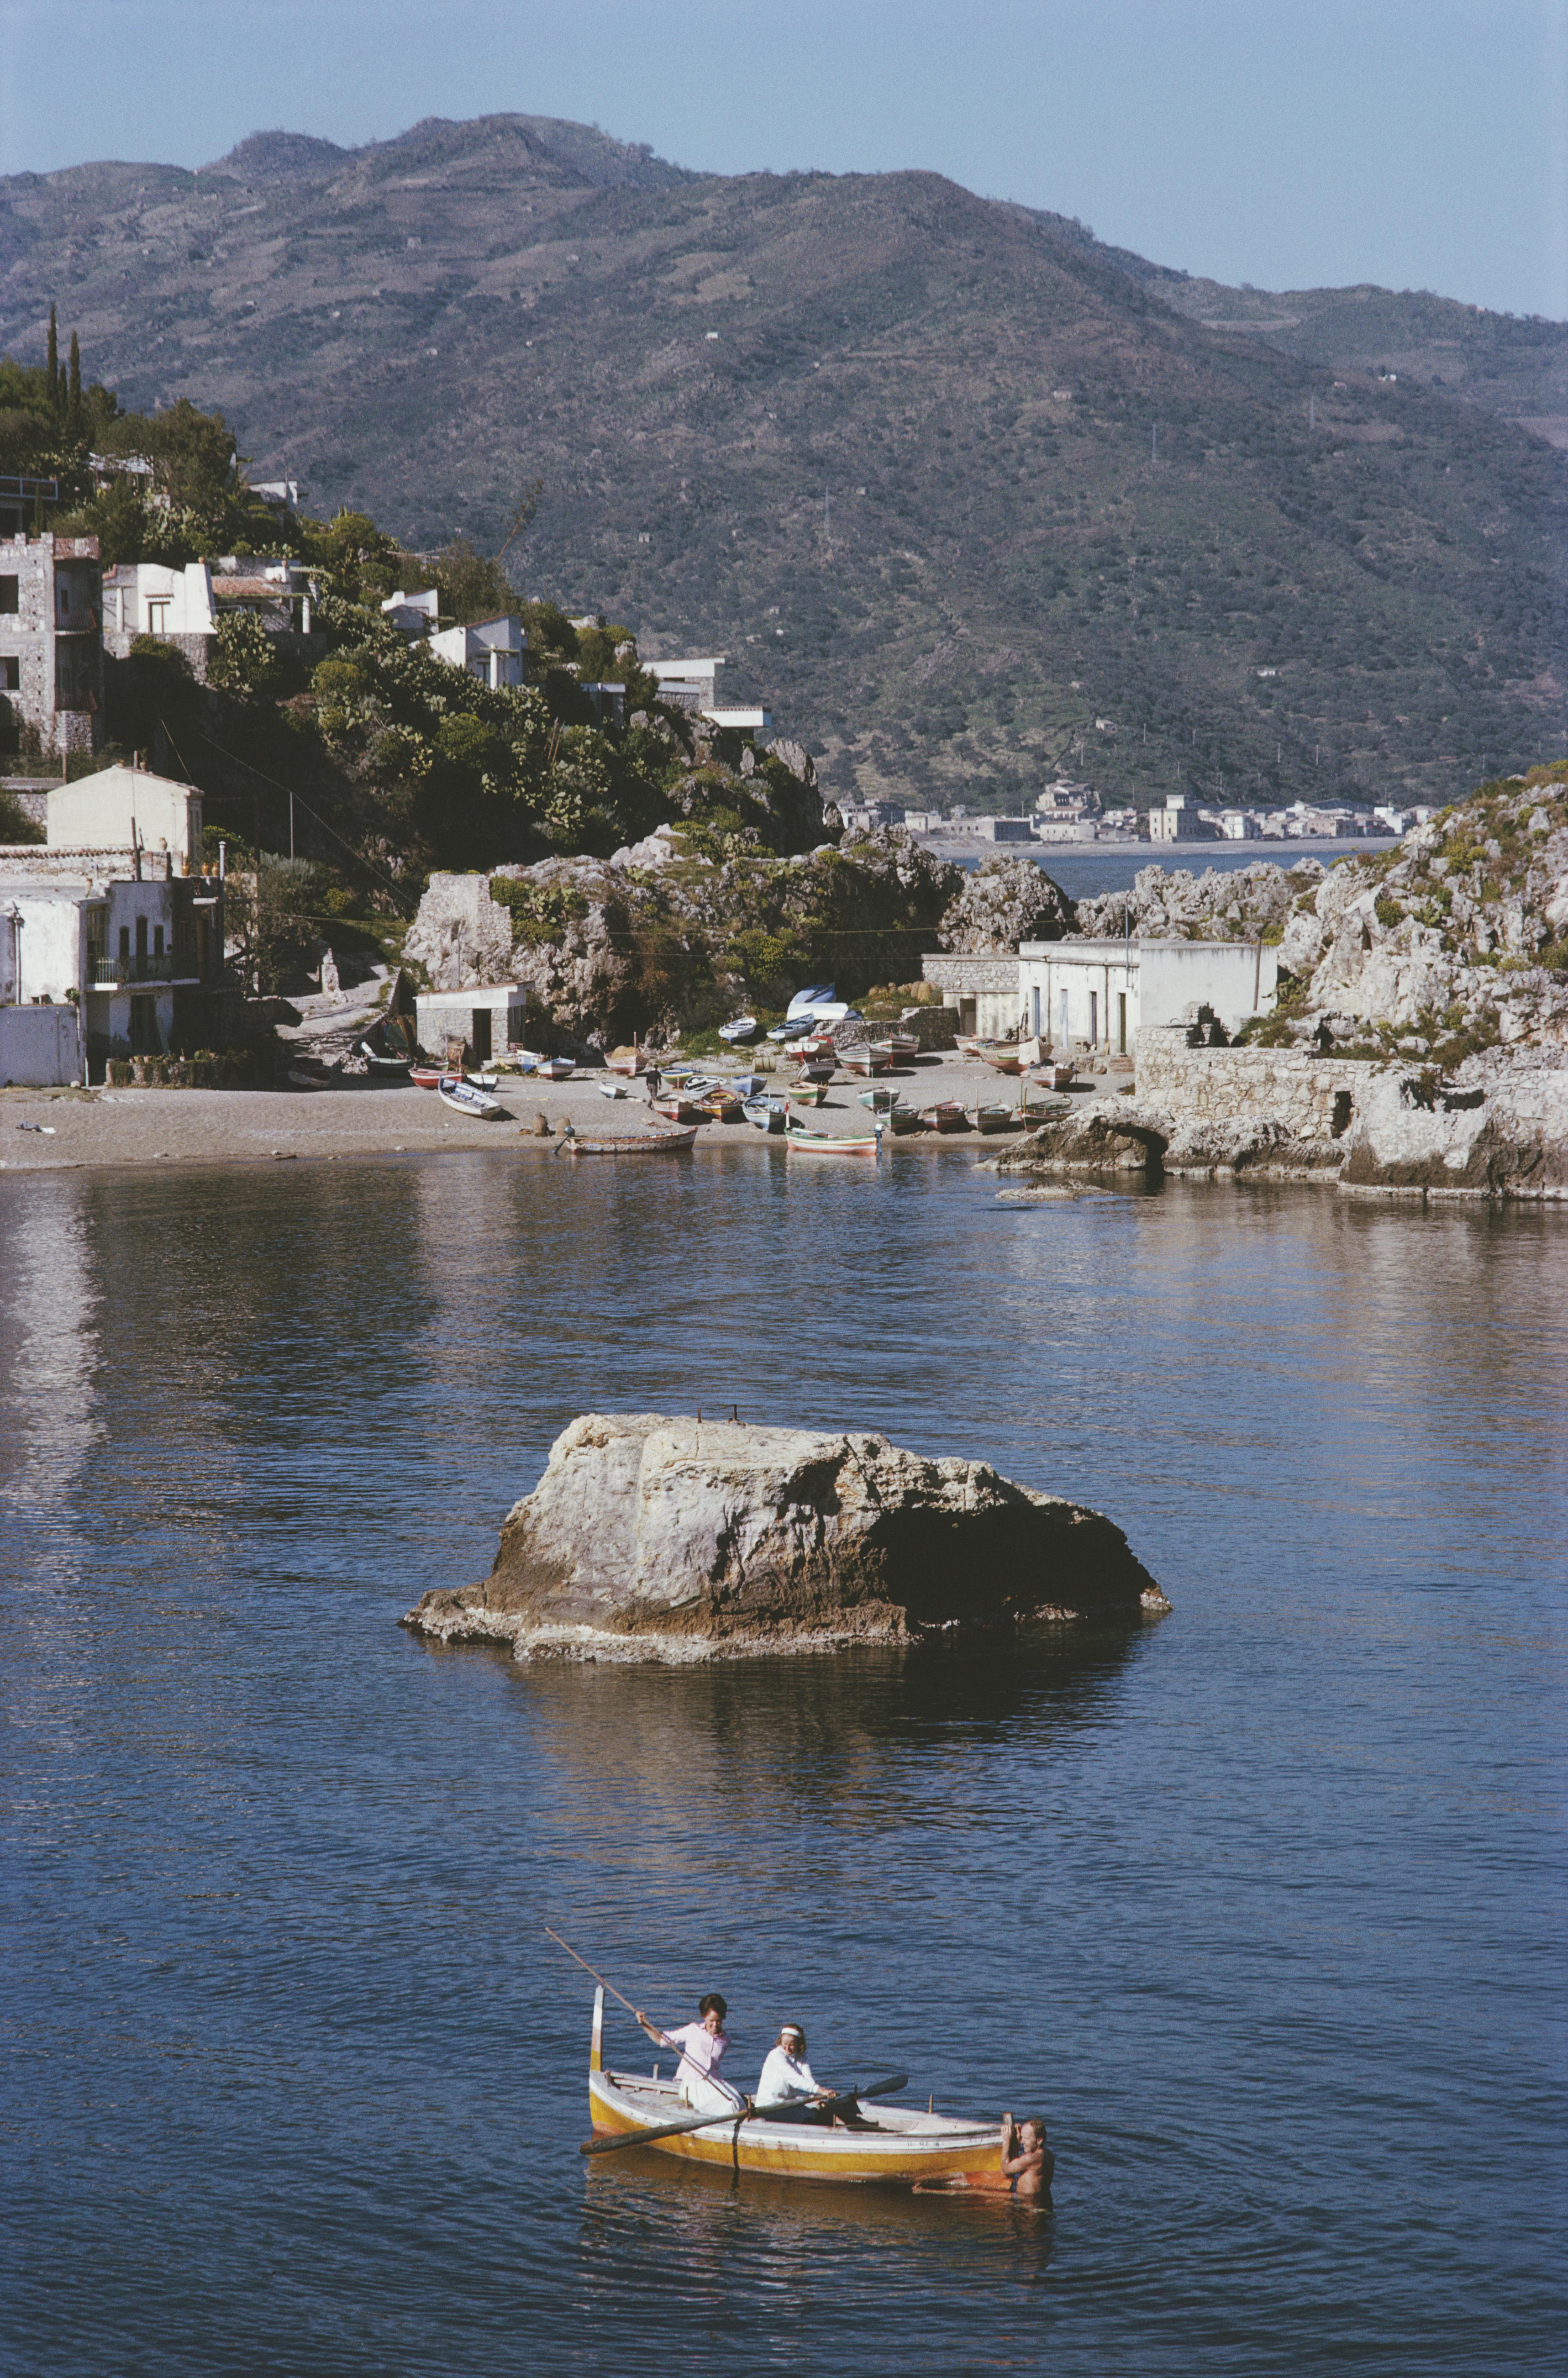 'Taormina' 1963 Slim Aarons Limited Estate Edition Print 

The coastal town of Taormina in Sicily, Italy, March 1963.

Produced from the original transparency
Certificate of authenticity supplied 
Archive stamped

Paper Size  24x20 inches / 60 x 50